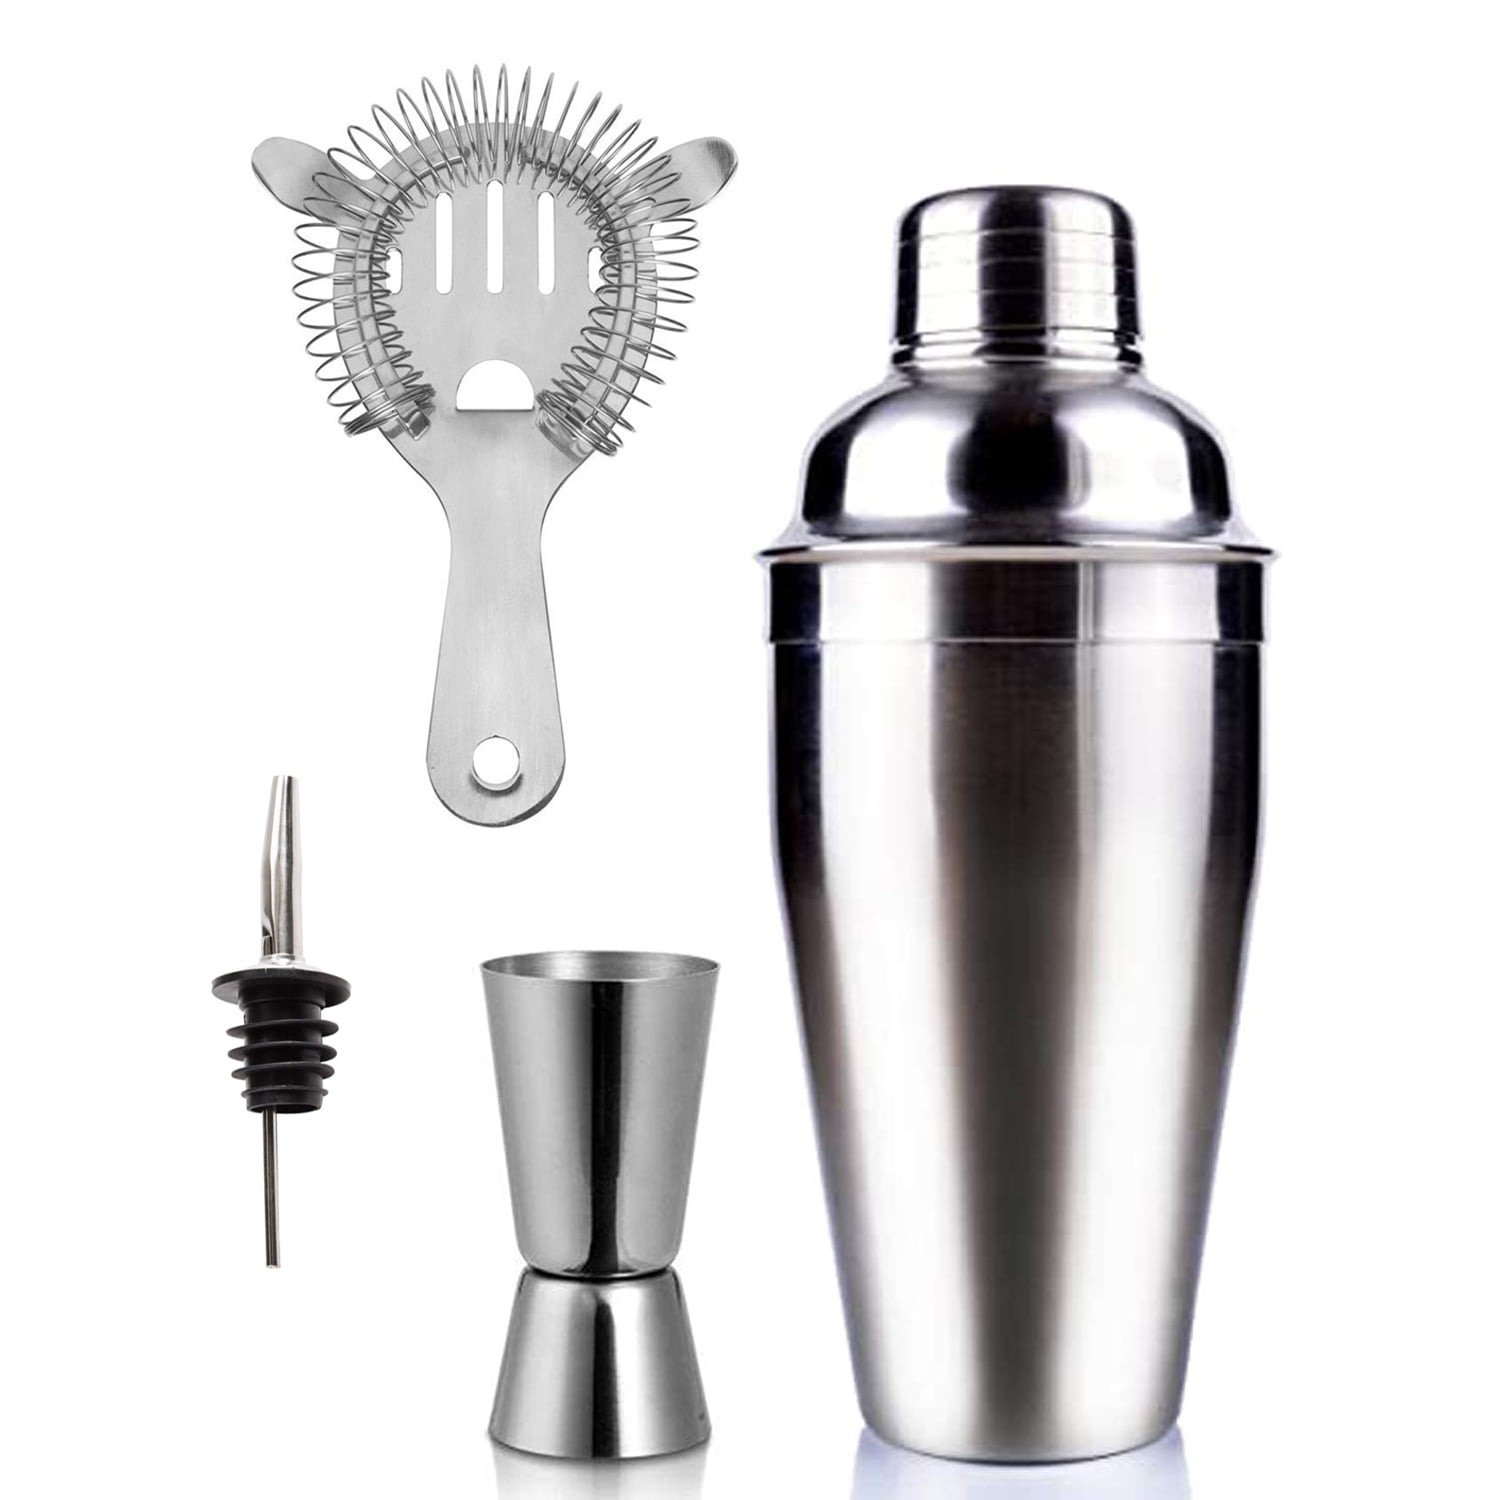 Cocktail Shaker and Bar Tools Set of 4 pieces, Stainless Steel